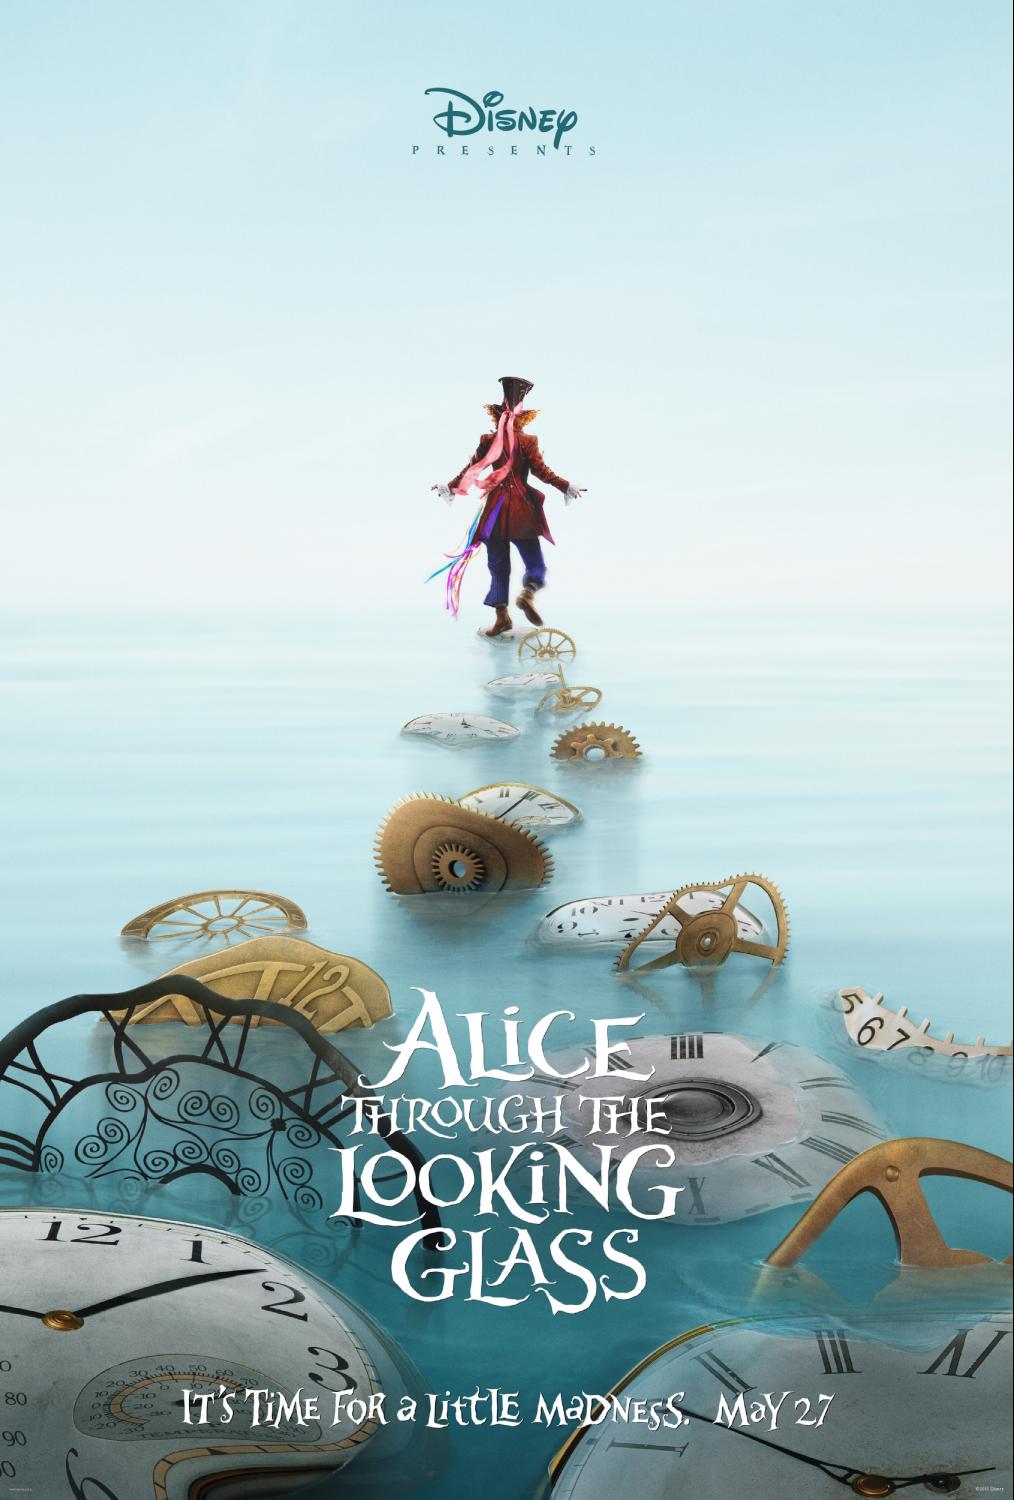 Alice Through the Looking Glass Poster of the Mad Hatter